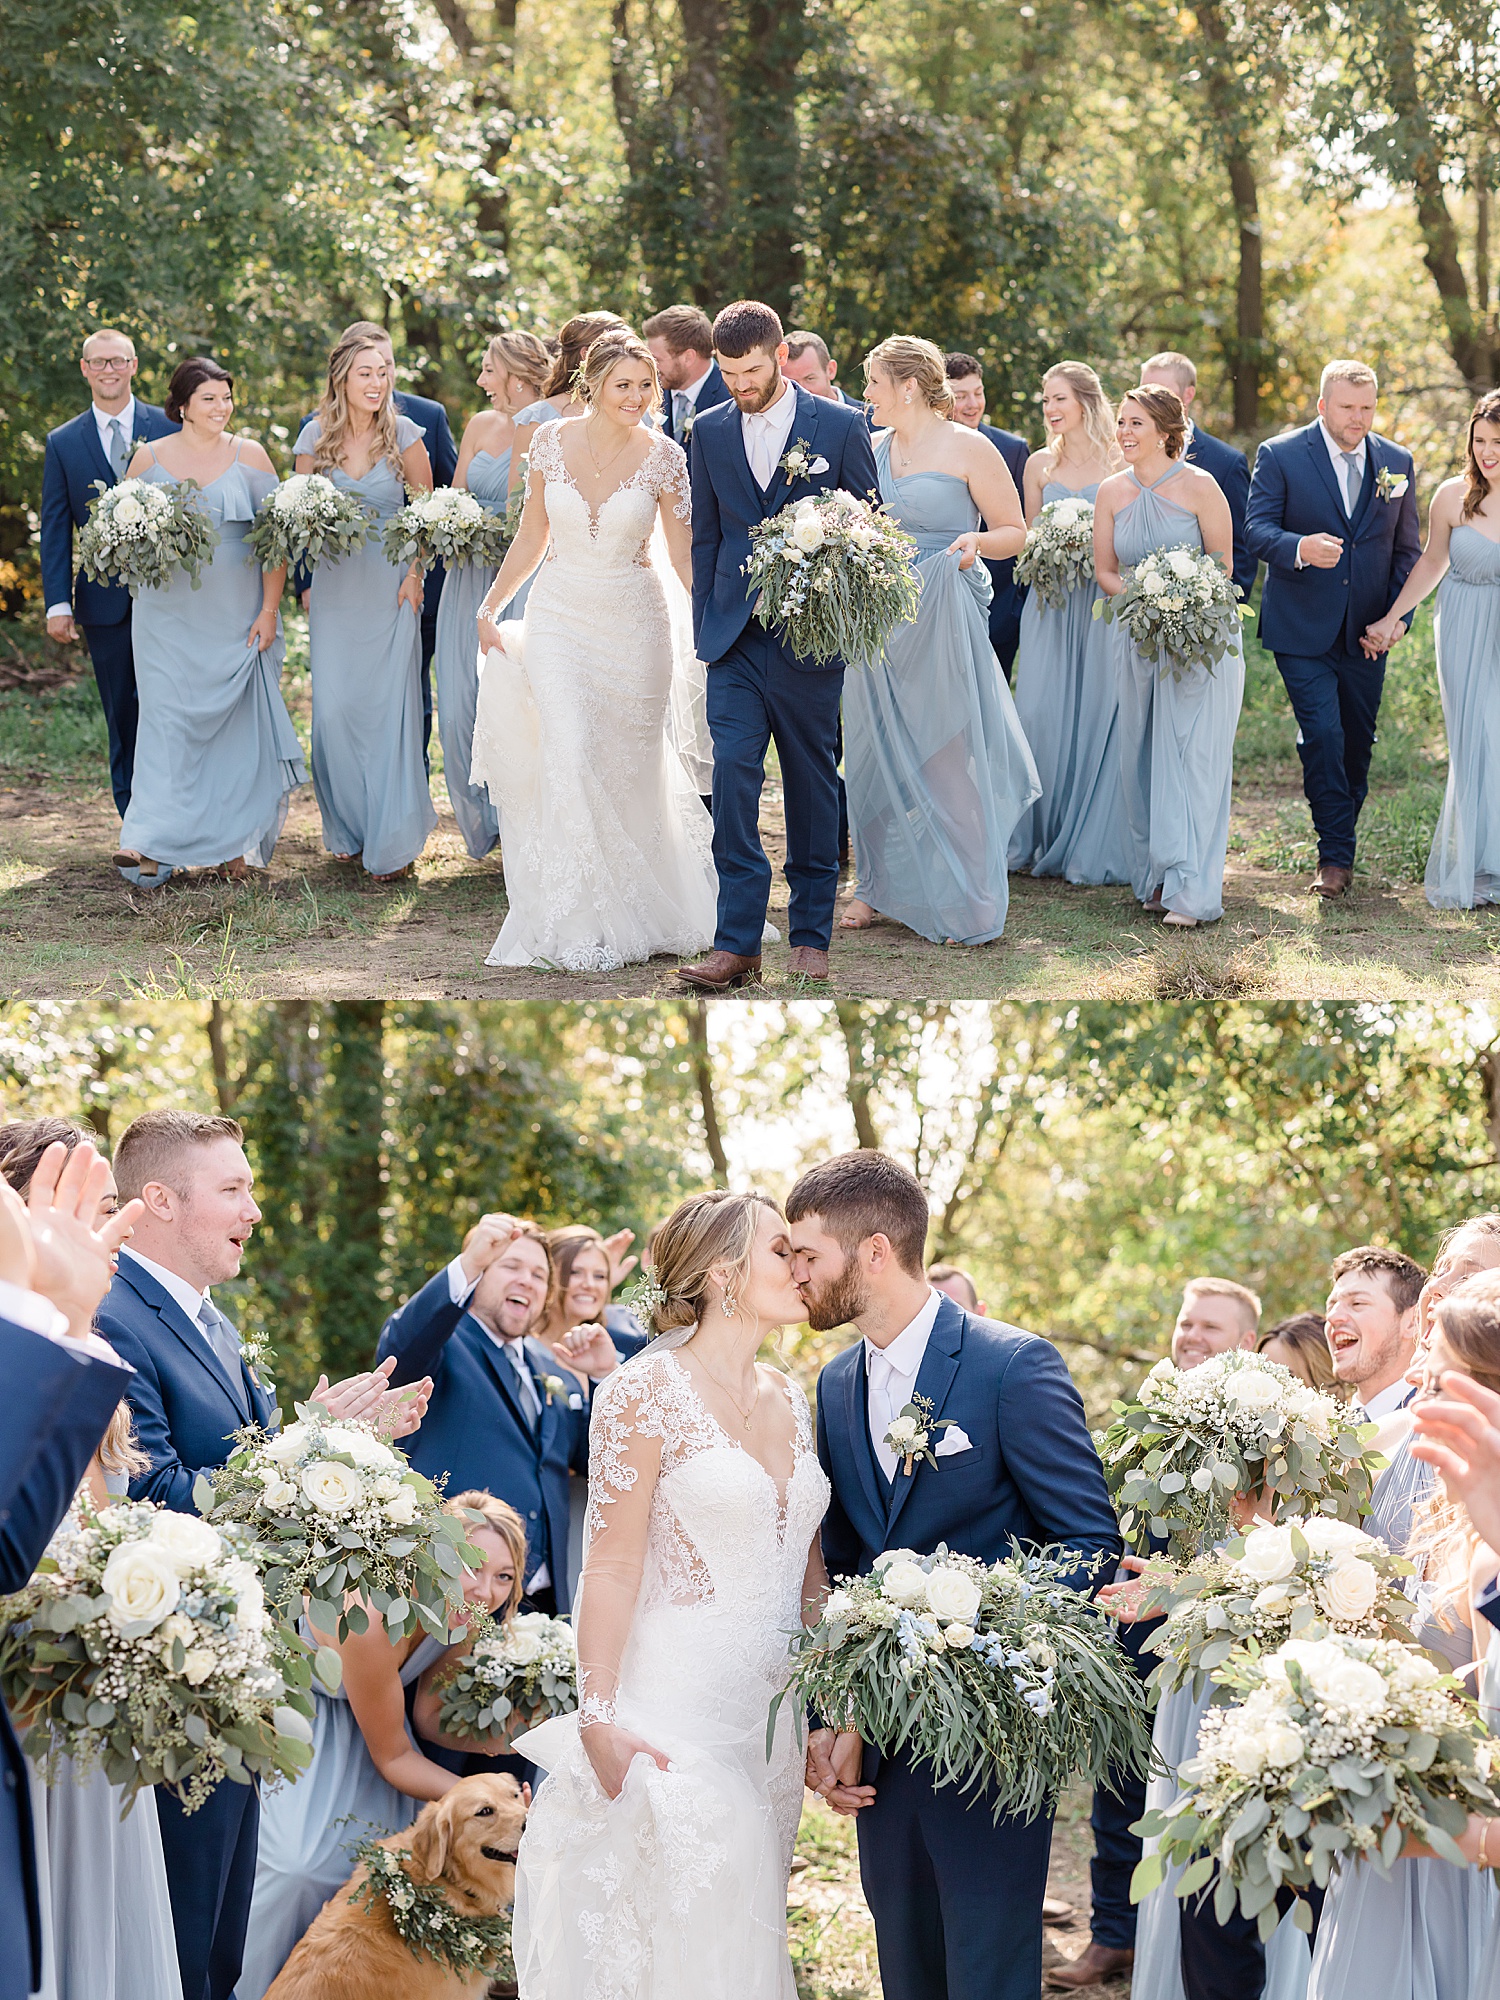 wedding party in blue suits and ladies in baby blue dresses holding wedding bouquets 